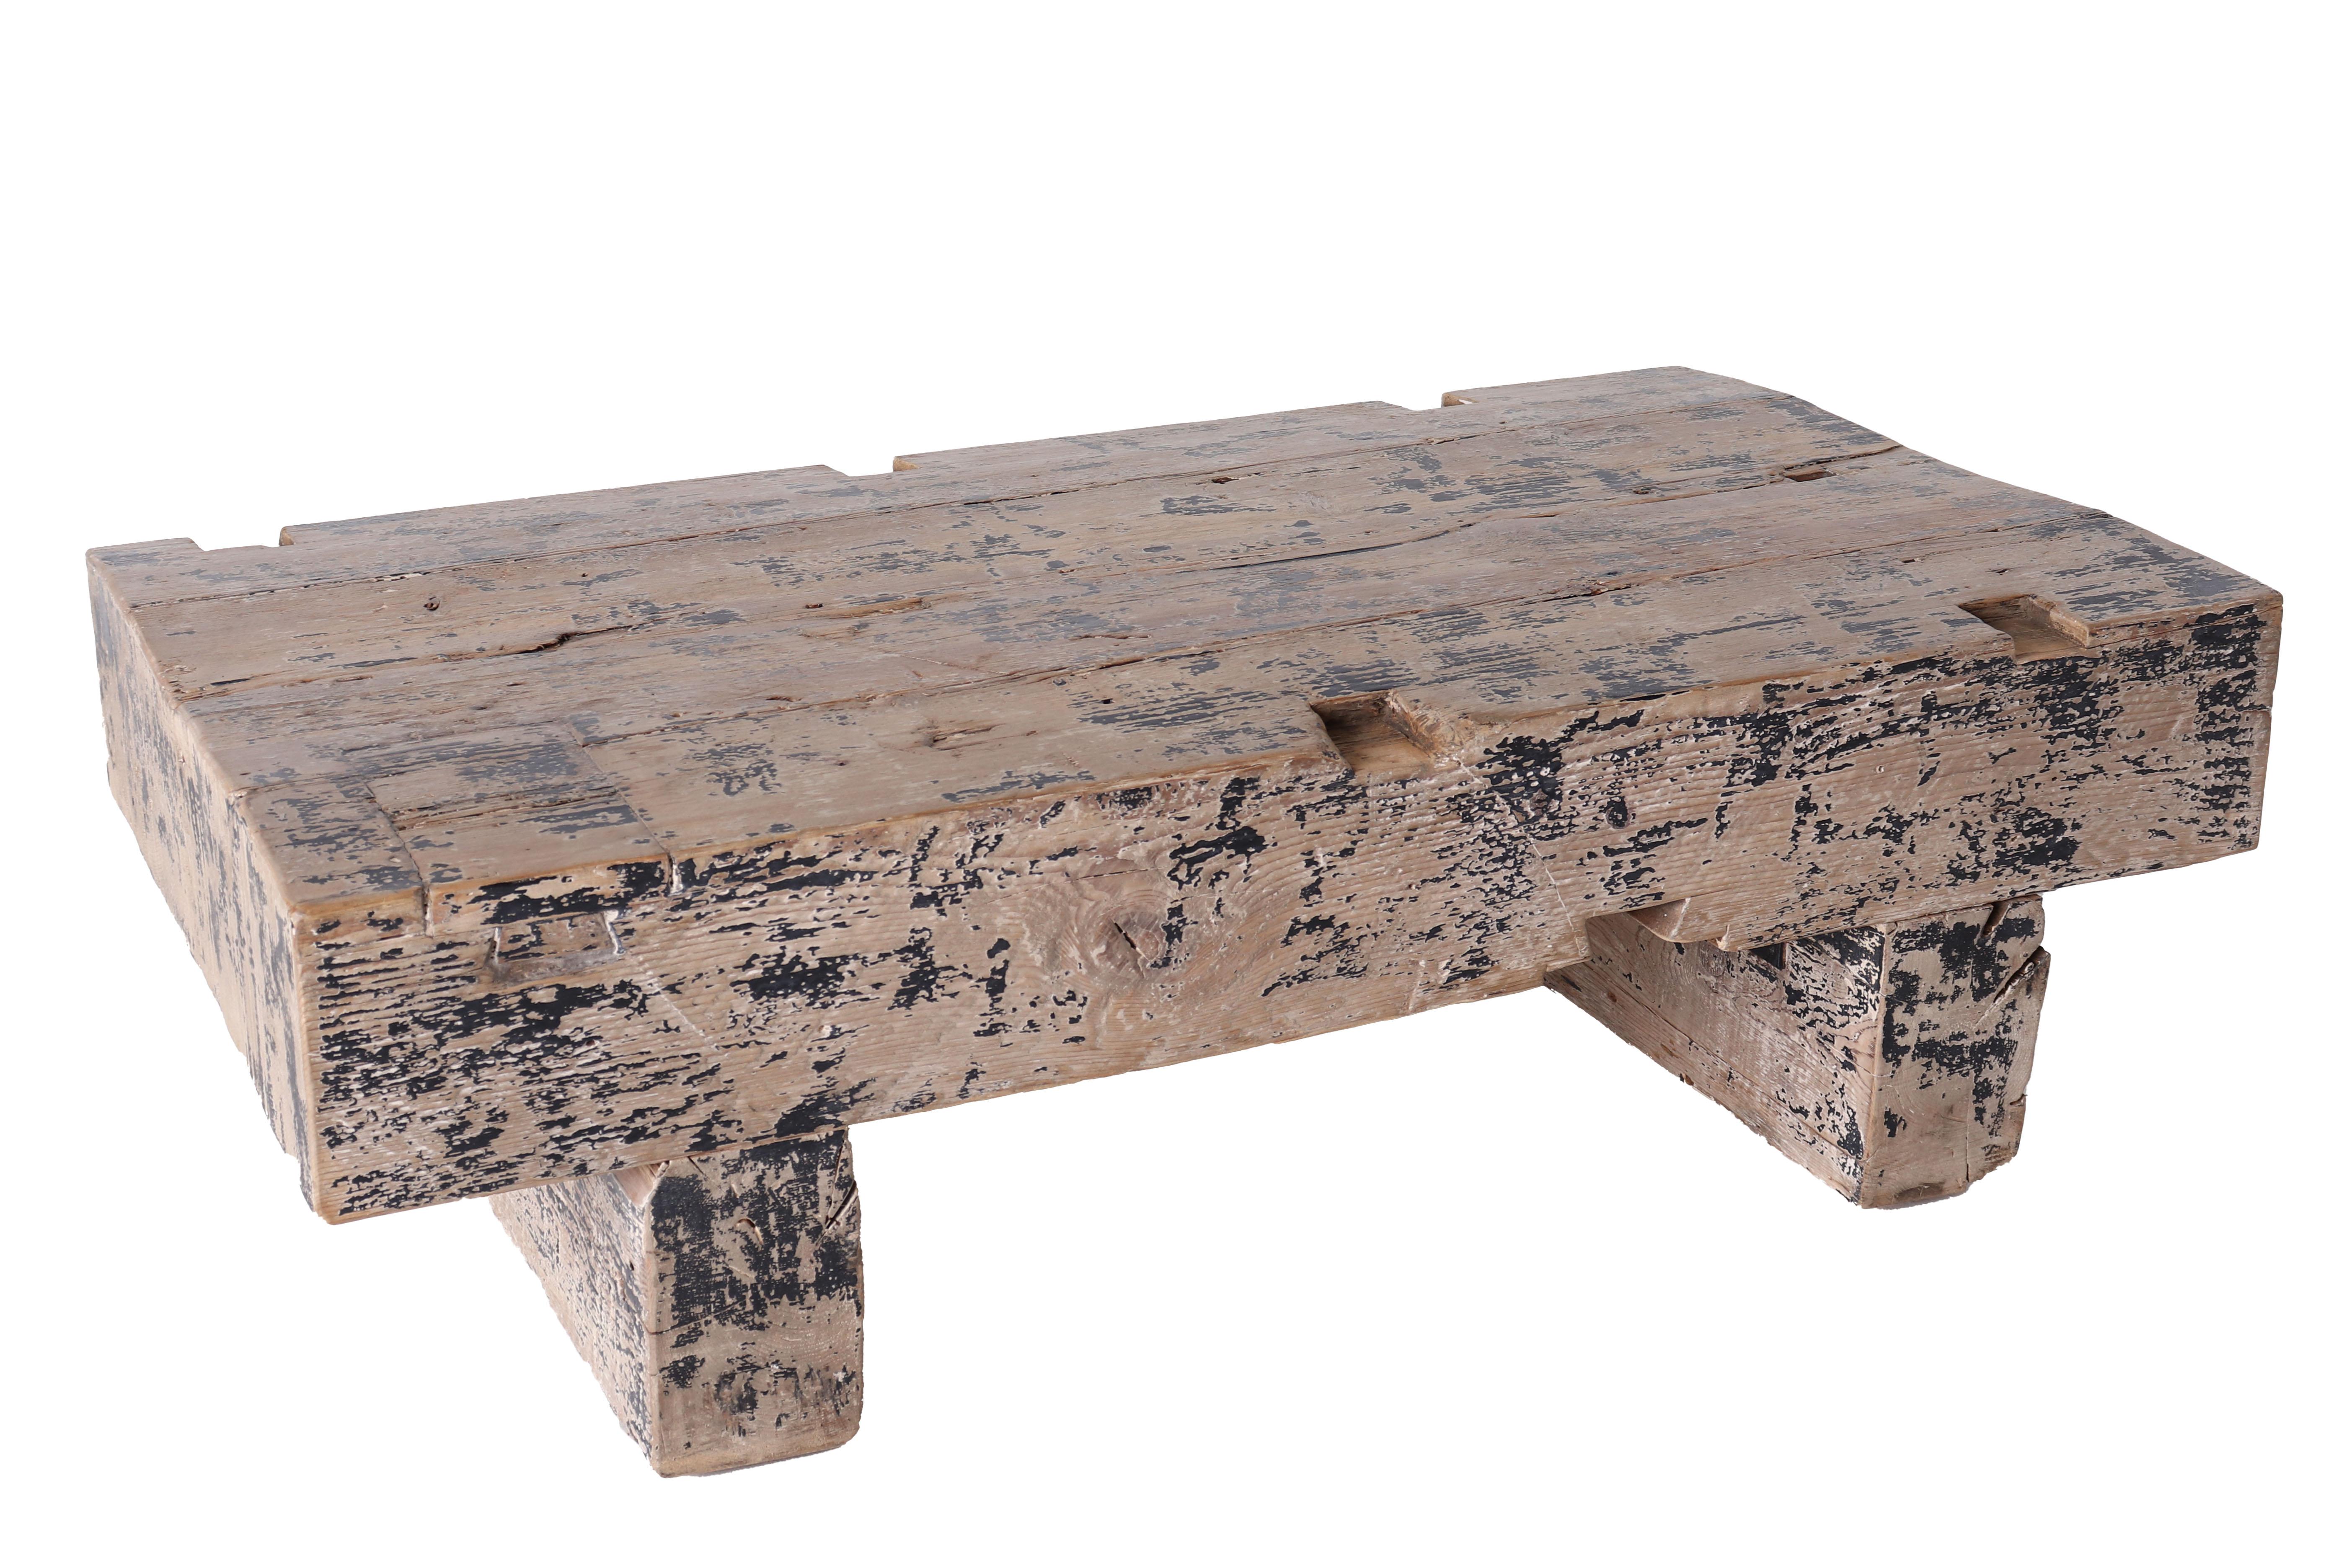 Patina chopping block coffee table

One of a kind piece sourced from Europe and imported to Dallas, TX. This piece is a one of a kind original piece with vintage appeal.